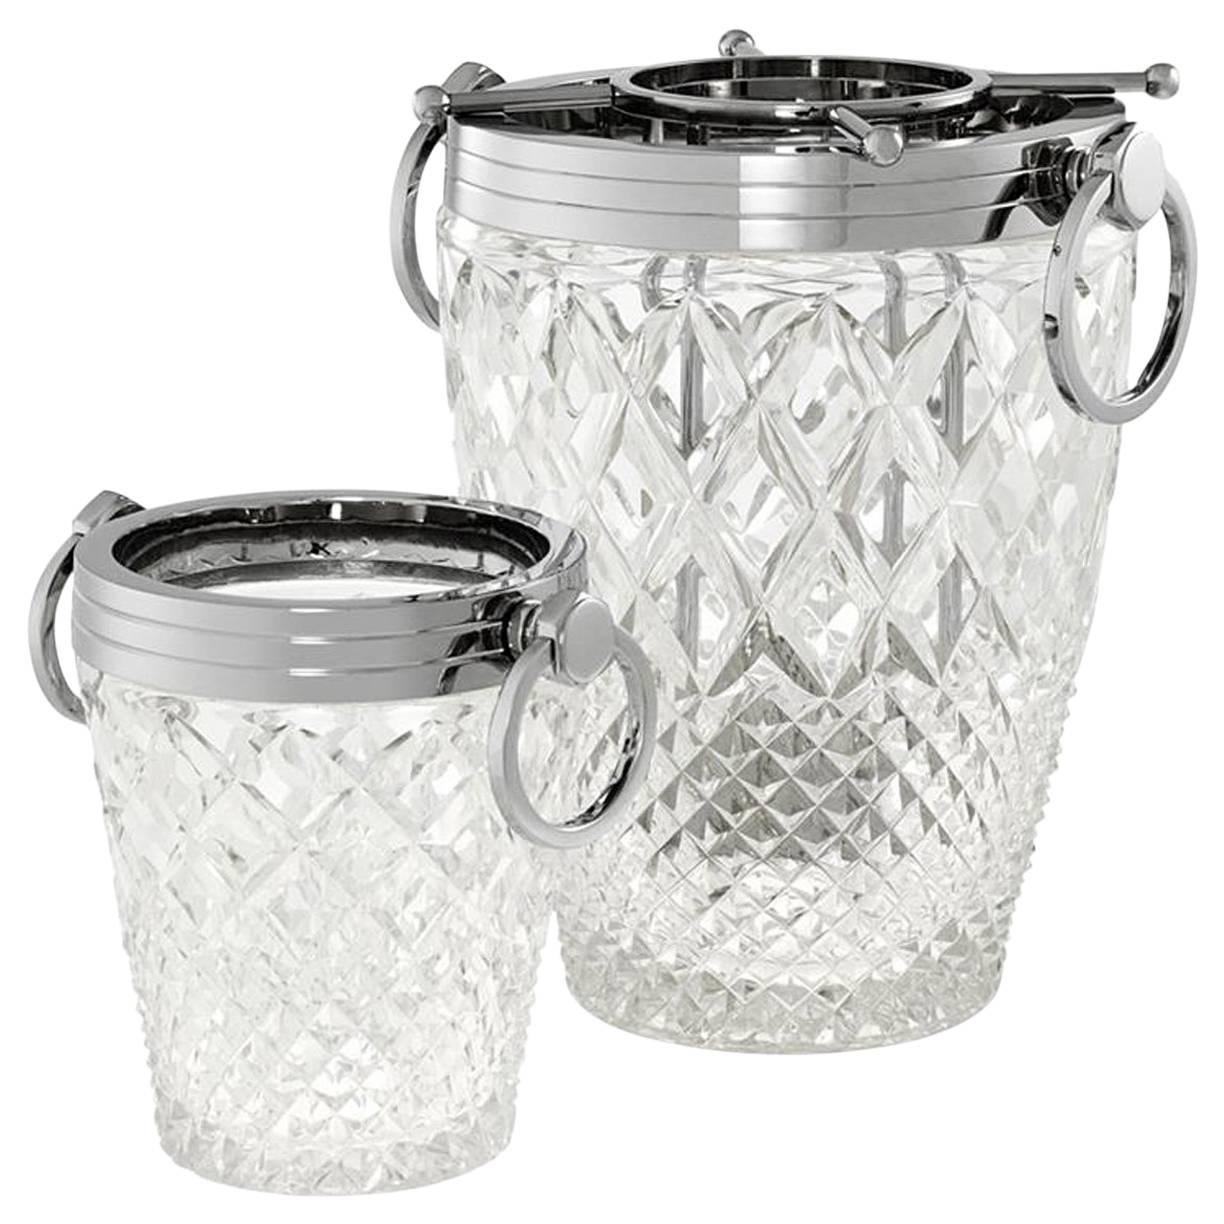 Weston Wine Cooler Set of Two in Hand-Cut Clear Glass